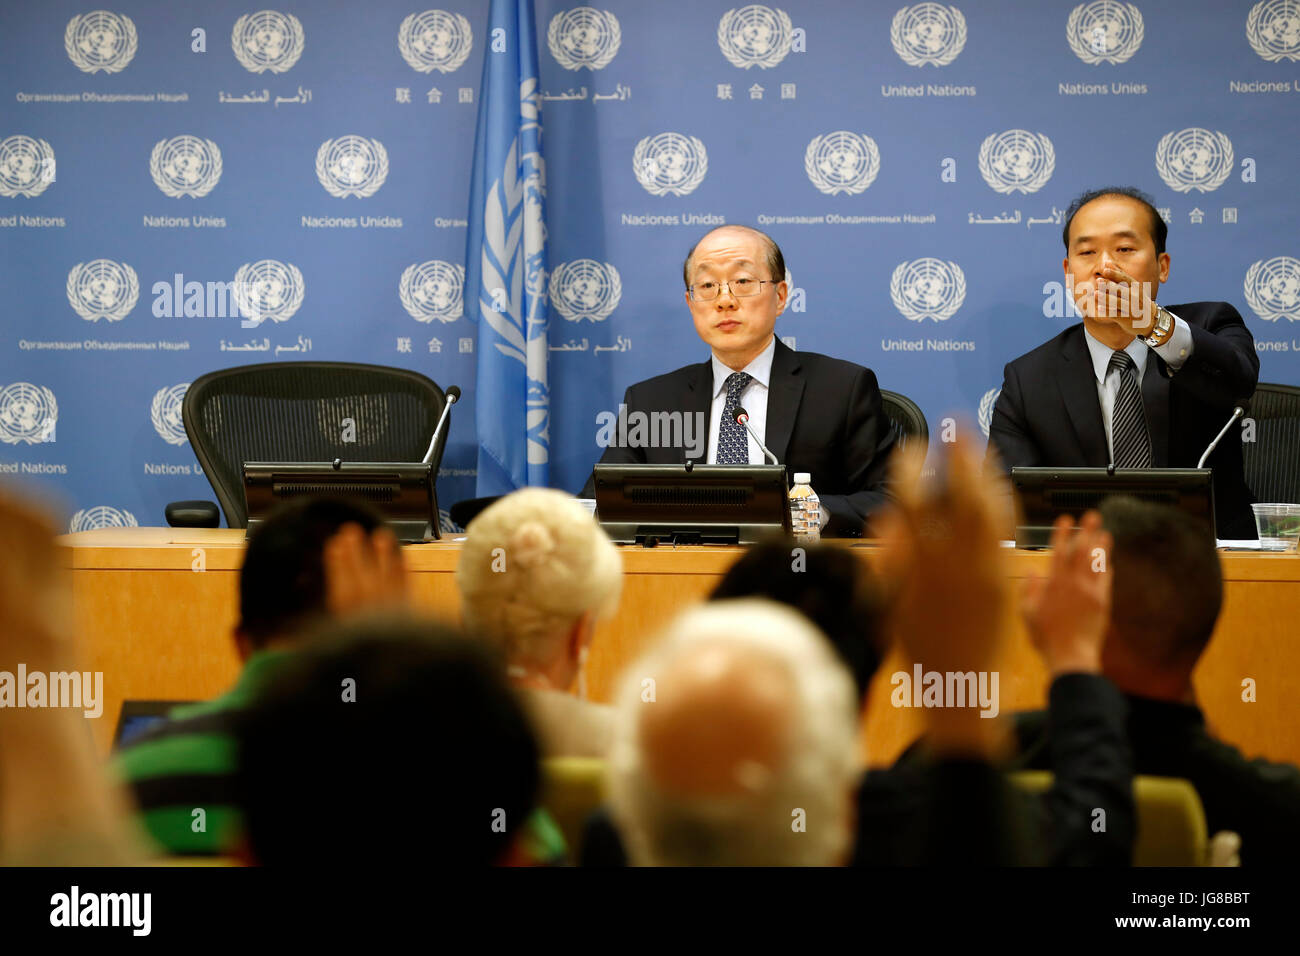 United Nations, UN headquarters. 4th July, 2017. Liu Jieyi (L), China's permanent representative to the Unite Nations and UN Security Council president for July, attends a press conference at the UN headquarters, July 4, 2017. Ambassador Liu Jieyi of China, UN Security Council president for July, said on Monday that issues of Syria, Yemen, South Sudan, Colombia, Haiti and Cyprus will be on the agenda of the 15-nation council in July. Credit: Li Muzi/Xinhua/Alamy Live News Stock Photo